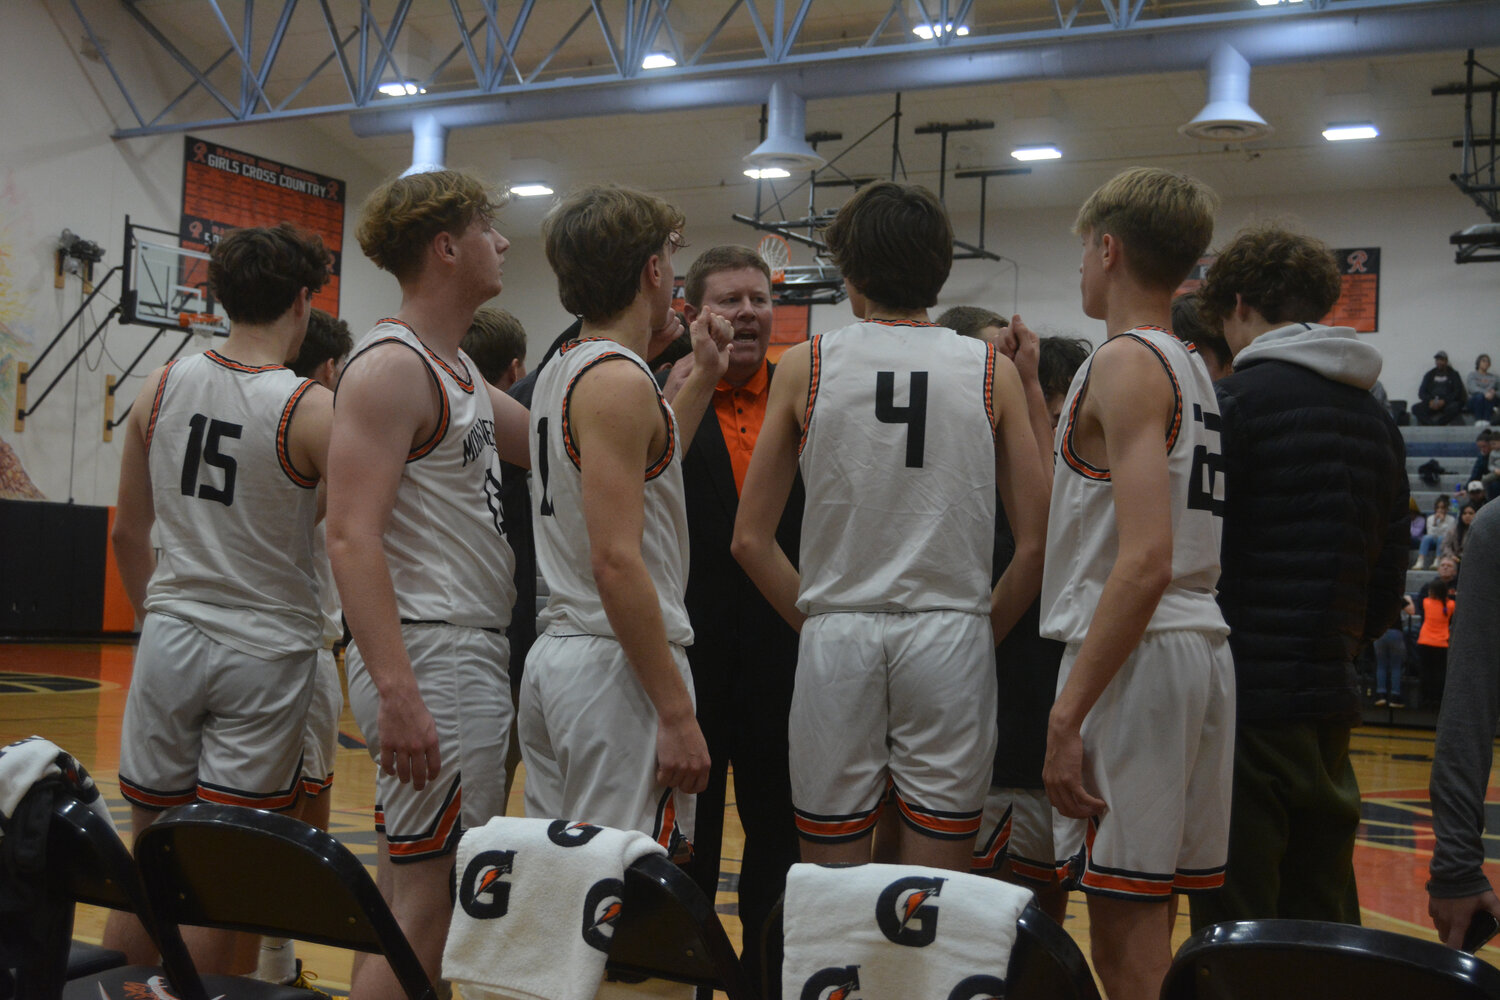 Ben Sheaffer (center) leads a huddle with his team during a timeout against Forks on Dec. 2.